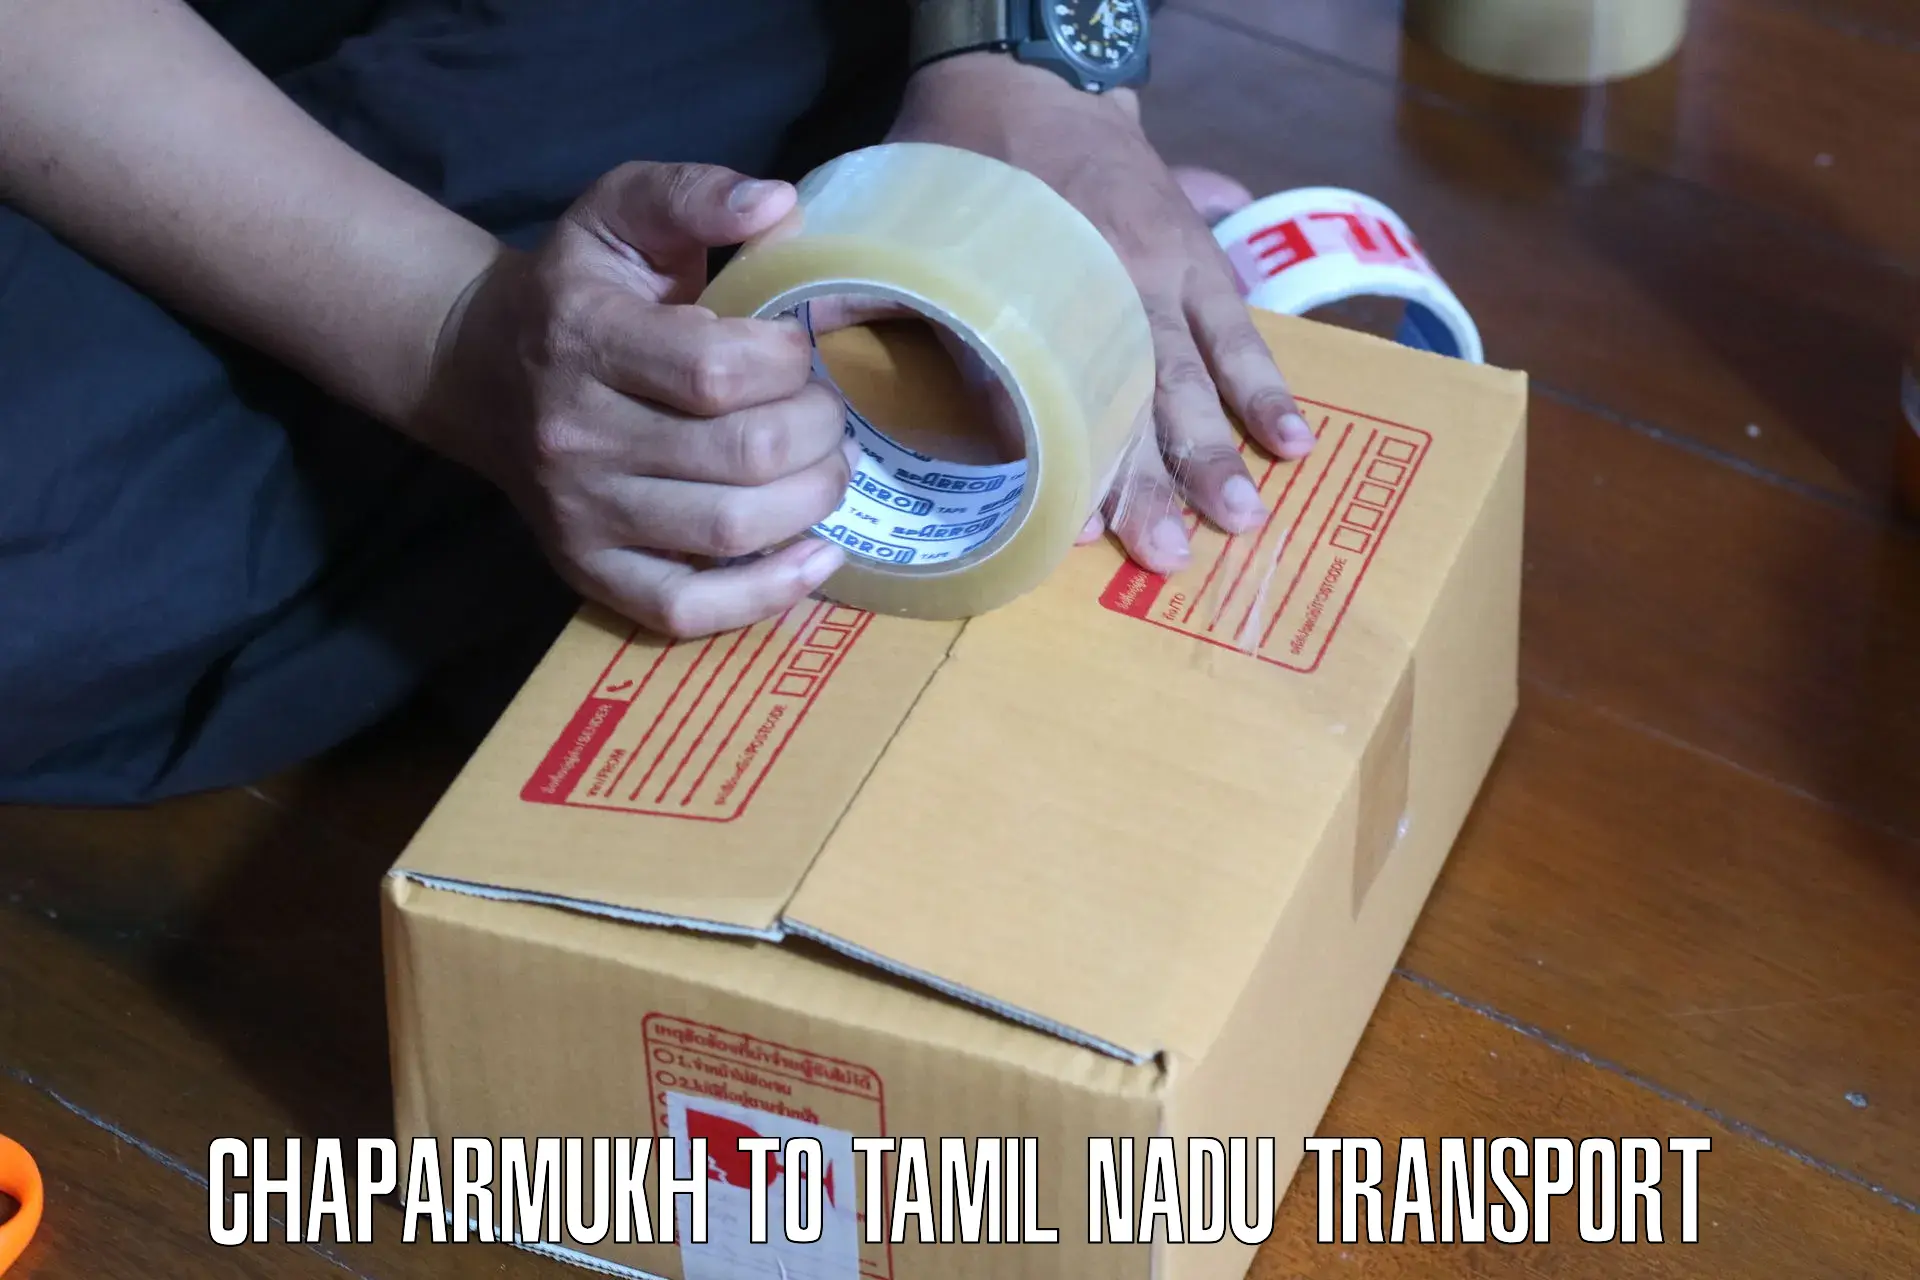 Material transport services Chaparmukh to Tamil Nadu